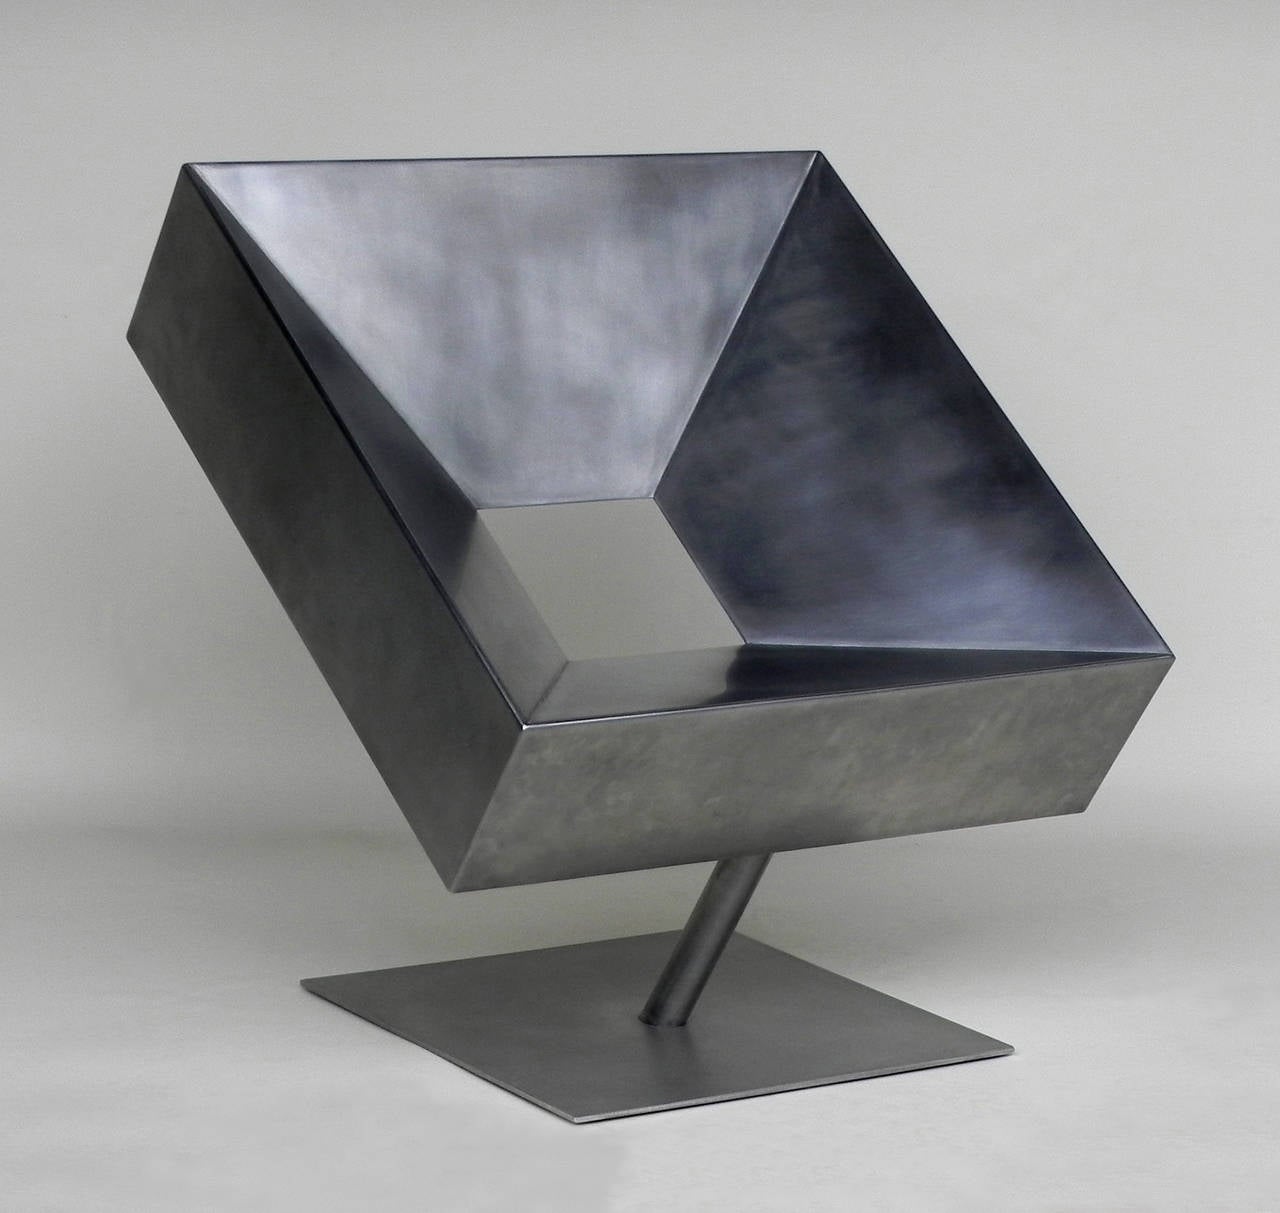 Brutalist chair in steel with a smooth waxed finish. Stephane Ducatteau's pieces are sculptural and yet ergonomic and functional. He uses a range of metal treatments to achieve a glossy soft finish.

Please note that this particular Cadre chair has